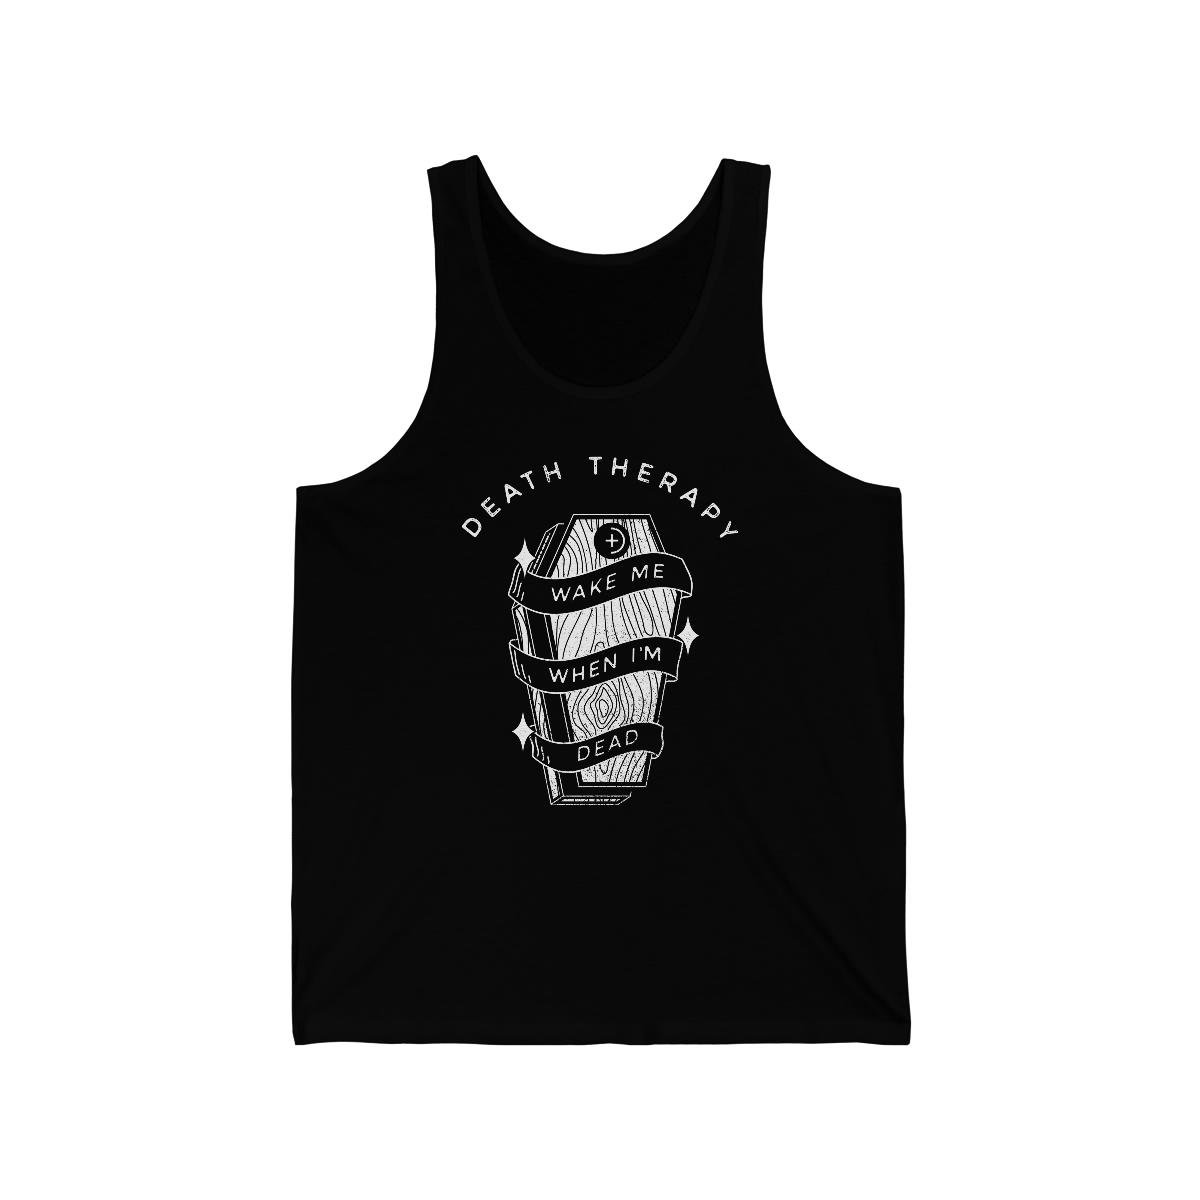 Death Therapy – Wake Me When I’m Dead Jersey Tank Top